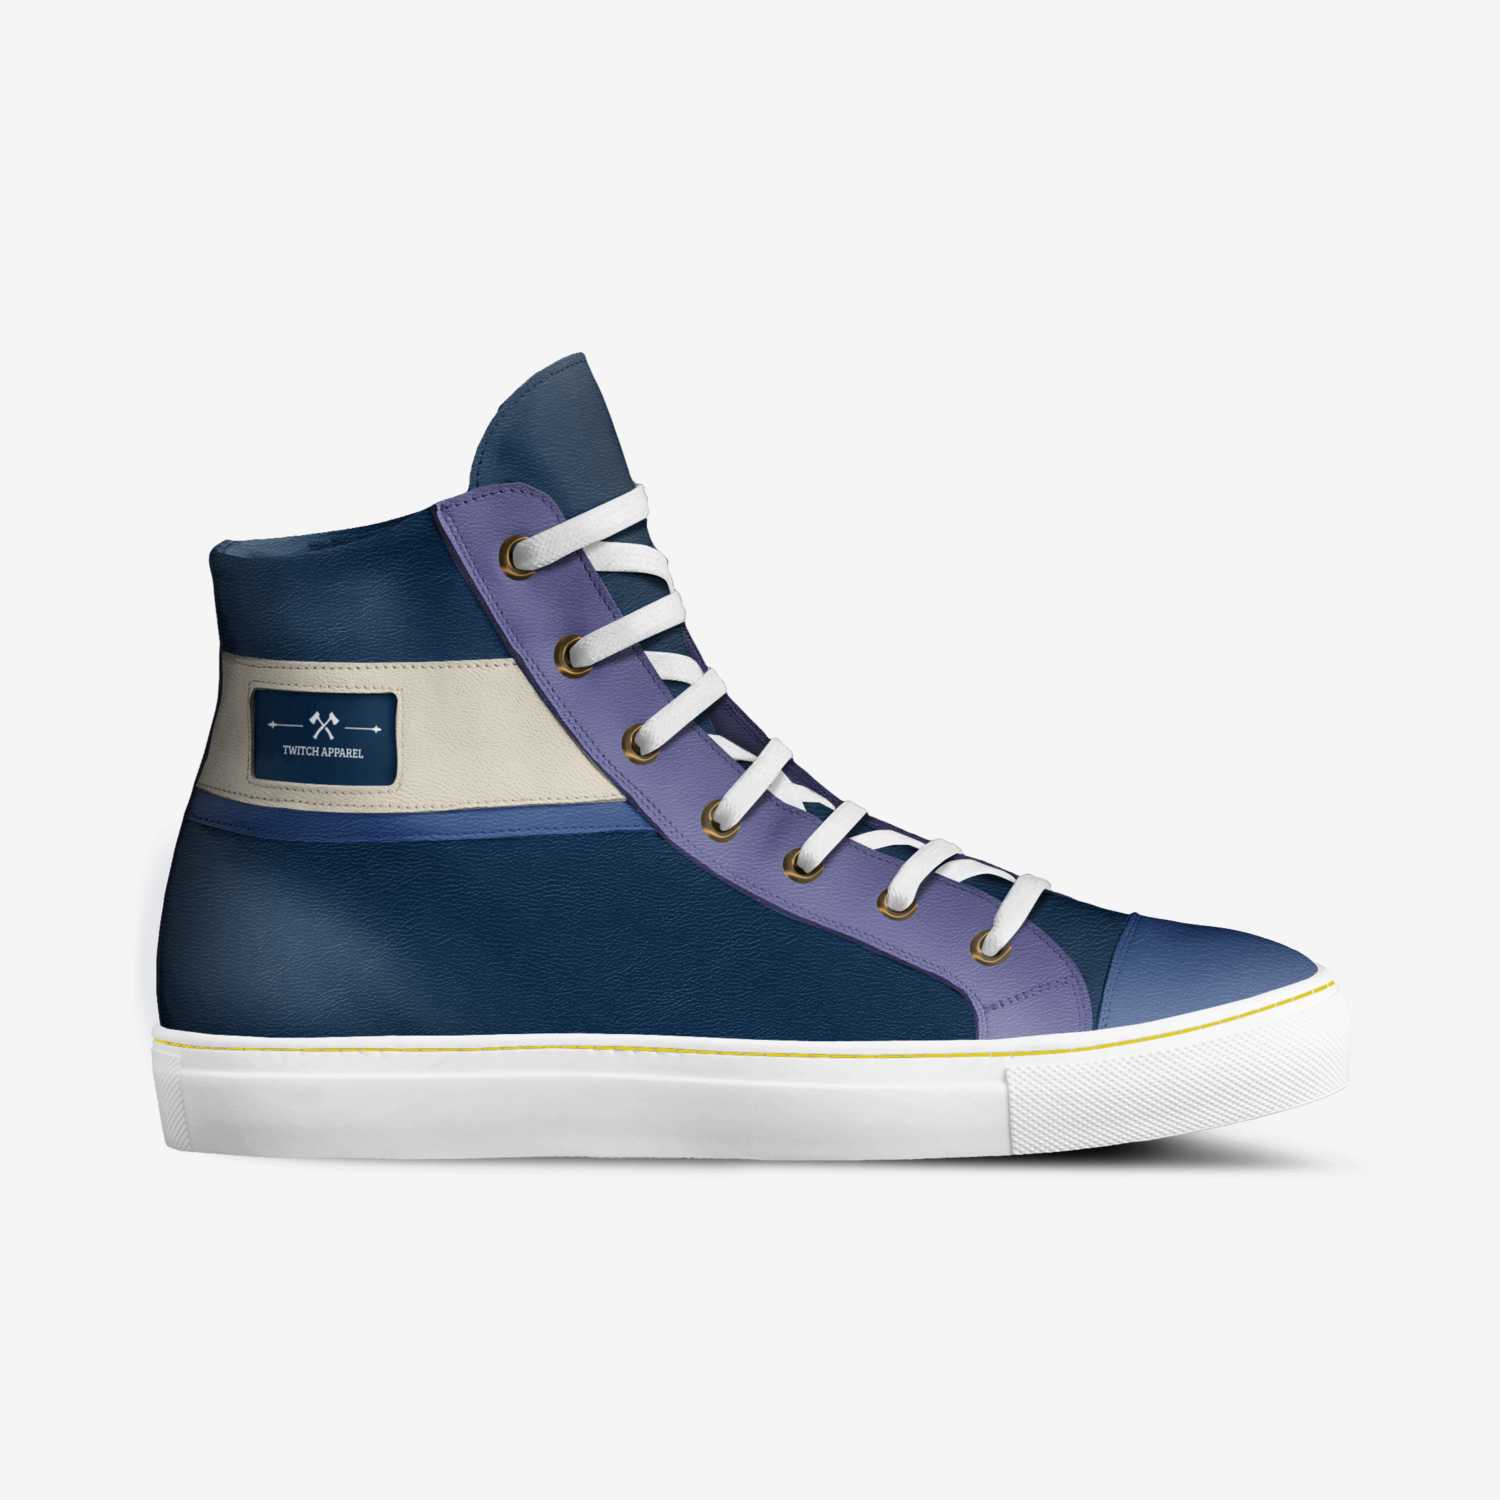 Twitch Apparel custom made in Italy shoes by Daniel Levie | Side view